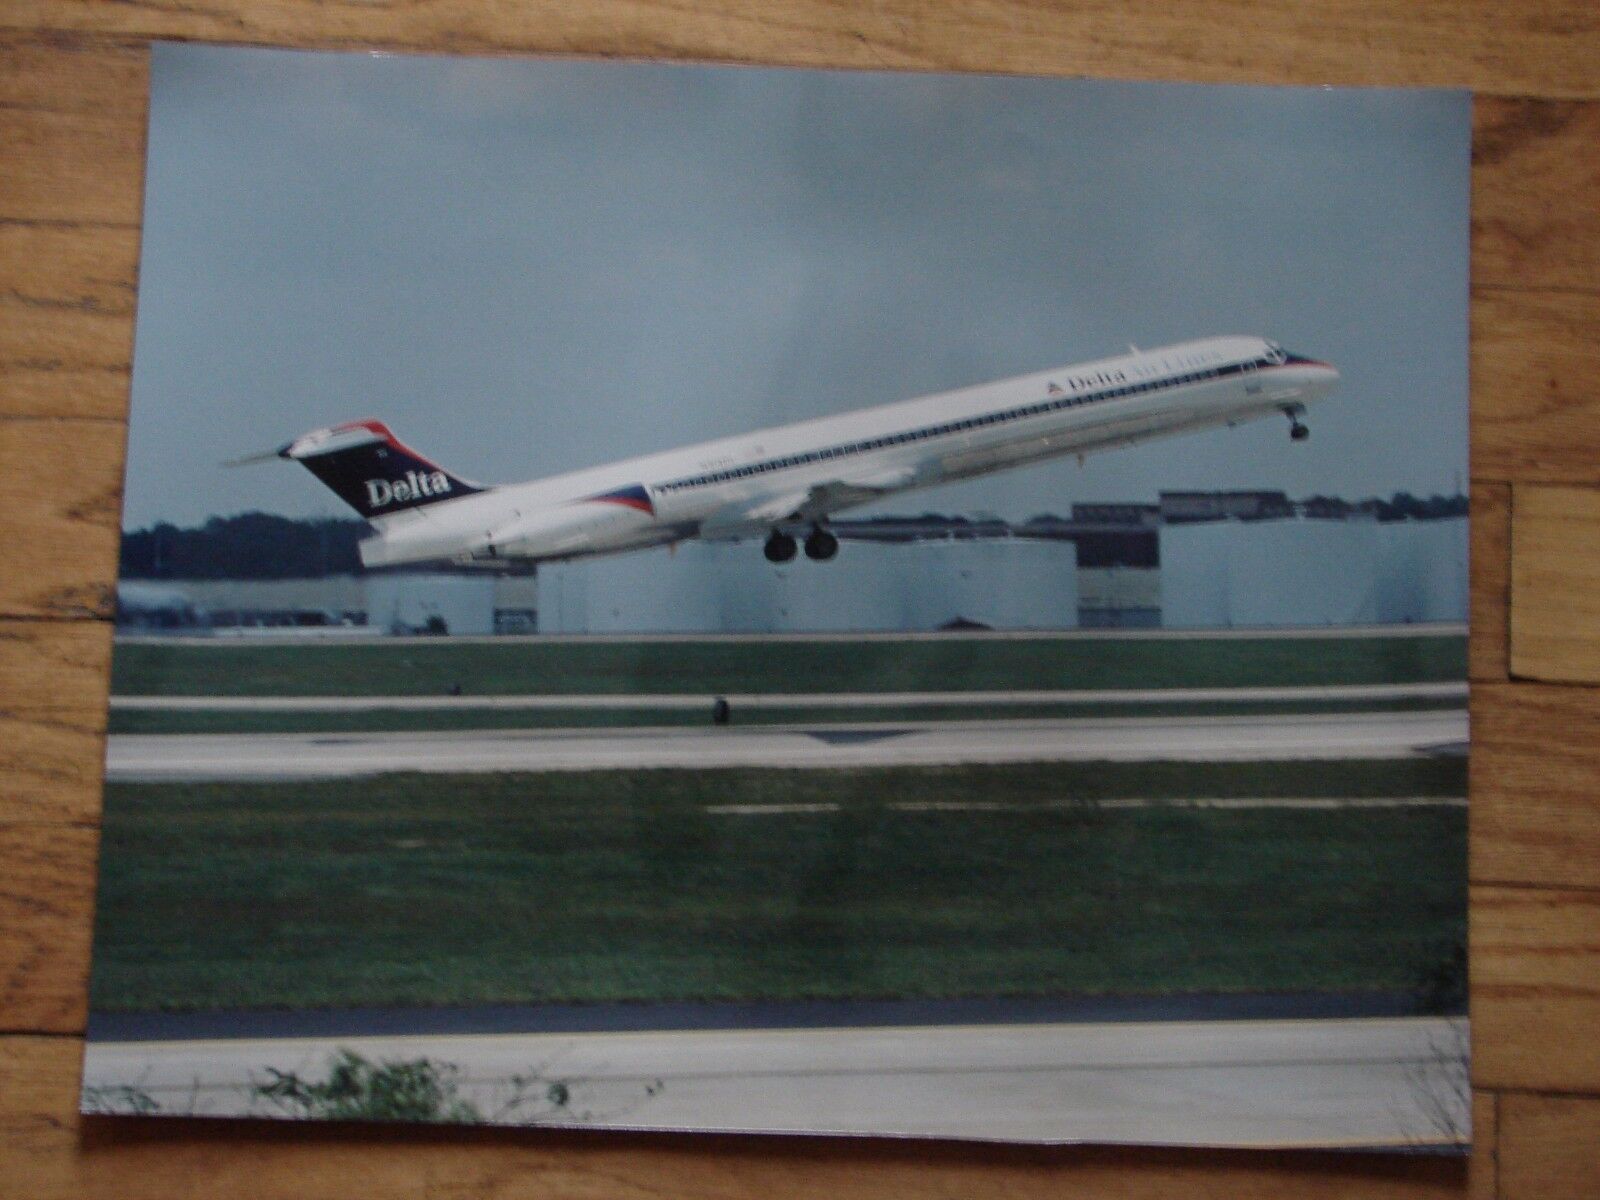 DELTA - LARGE PHOTO - MD 90 - ON TAKE OFF  - 20 X 16